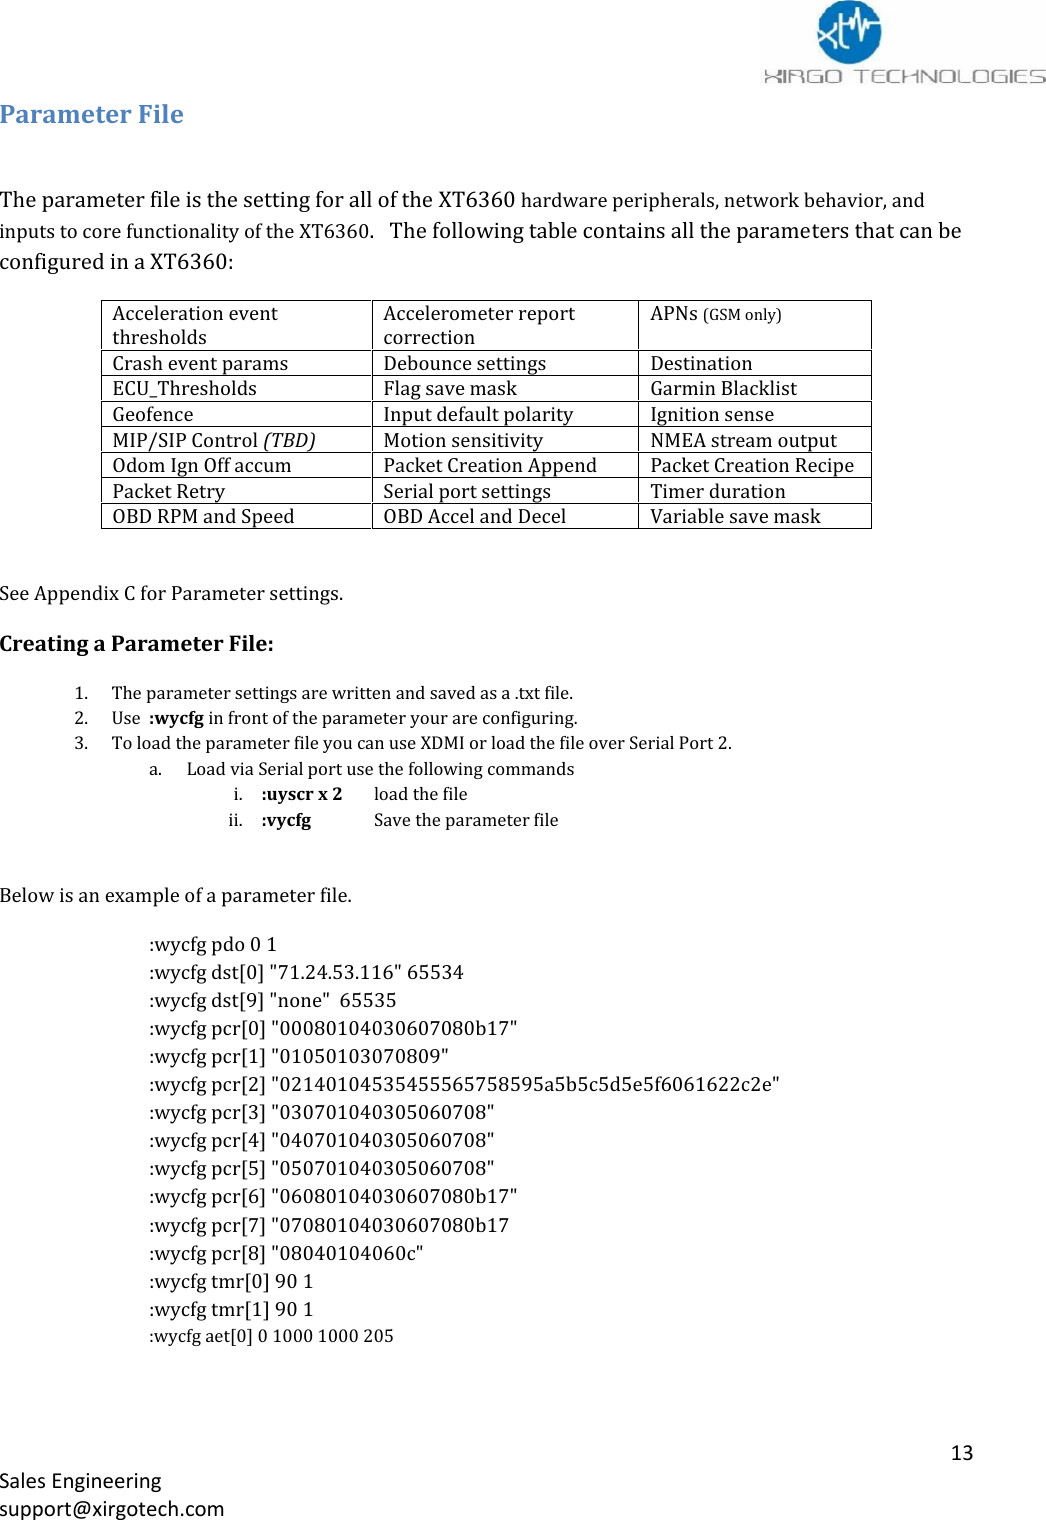 13Sales Engineeringsupport@xirgotech.comParameter FileThe parameter file is the setting for all of the XT6360 hardware peripherals, network behavior, andinputs to core functionality of the XT6360.   The following table contains all the parameters that can beconfigured in a XT6360:Acceleration eventthresholdsAccelerometer reportcorrectionAPNs (GSM only)Crash event paramsDebounce settingsDestinationECU_ThresholdsFlag save maskGarmin BlacklistGeofenceInput default polarityIgnition senseMIP/SIP Control (TBD)Motion sensitivityNMEA stream outputOdom Ign Off accumPacket Creation AppendPacket Creation RecipePacket RetrySerial port settingsTimer durationOBD RPM and SpeedOBD Accel and DecelVariable save maskSee Appendix C for Parameter settings.Creating a Parameter File:1. The parameter settings are written and saved as a .txt file.2. Use :wycfg in front of the parameter your are configuring.3. To load the parameter file you can use XDMI or load the file over Serial Port 2.a. Load via Serial port use the following commandsi. :uyscr x 2 load the fileii. :vycfg Save the parameter fileBelow is an example of a parameter file.:wycfg pdo 0 1:wycfg dst[0] &quot;71.24.53.116&quot; 65534:wycfg dst[9] &quot;none&quot; 65535:wycfg pcr[0] &quot;00080104030607080b17&quot;:wycfg pcr[1] &quot;01050103070809&quot;:wycfg pcr[2] &quot;02140104535455565758595a5b5c5d5e5f6061622c2e&quot;:wycfg pcr[3] &quot;030701040305060708&quot;:wycfg pcr[4] &quot;040701040305060708&quot;:wycfg pcr[5] &quot;050701040305060708&quot;:wycfg pcr[6] &quot;06080104030607080b17&quot;:wycfg pcr[7] &quot;07080104030607080b17:wycfg pcr[8] &quot;08040104060c&quot;:wycfg tmr[0] 90 1:wycfg tmr[1] 90 1:wycfg aet[0] 0 1000 1000 205